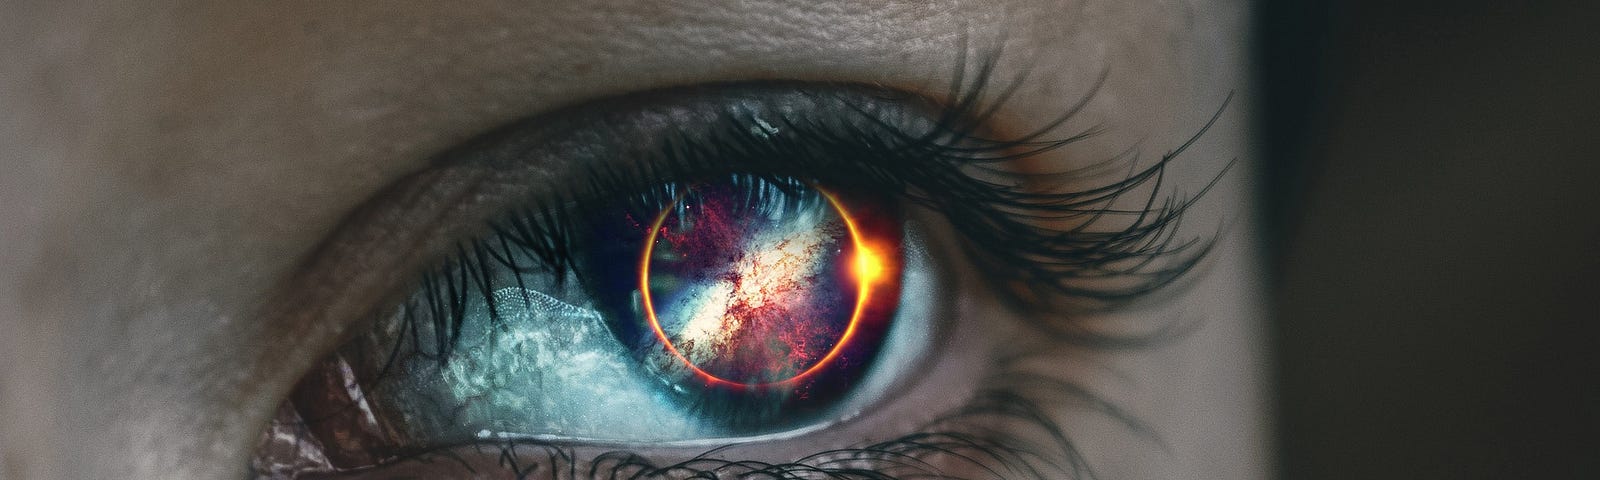 A woman’s eye with a sun-like circle of orange light in it.